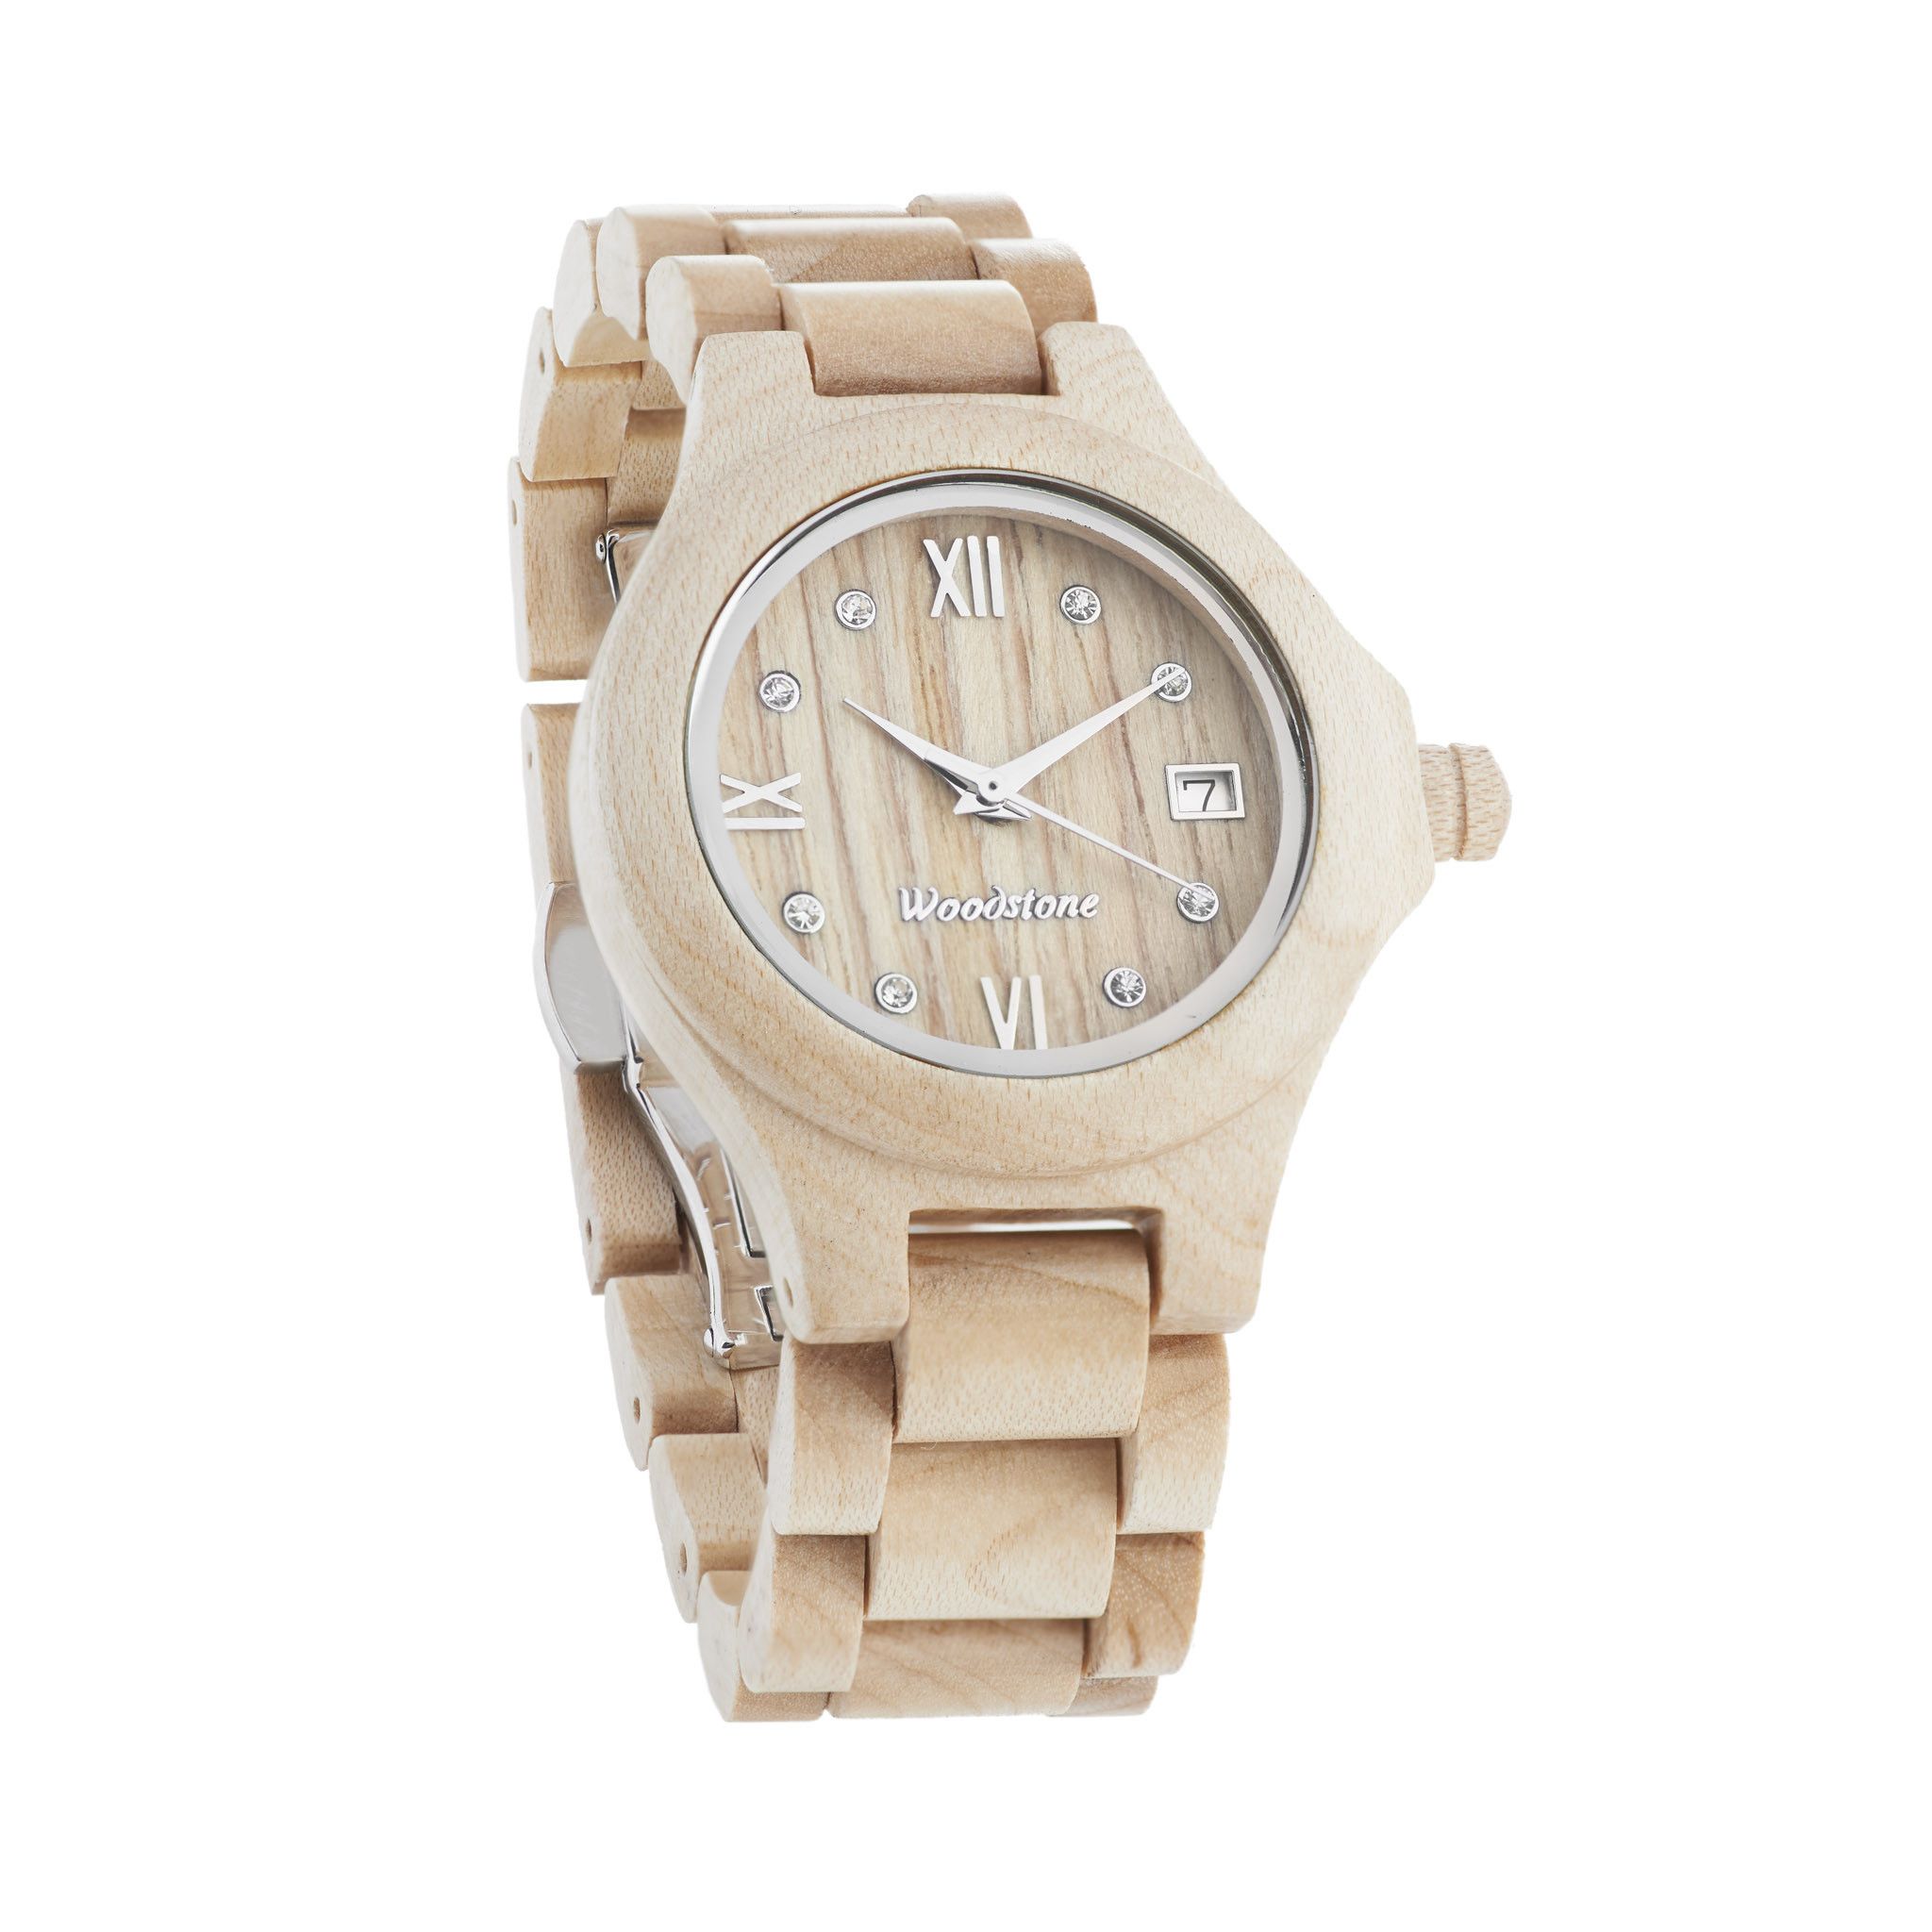 Queen maple wood | Wooden watch, Queens and Jewerly